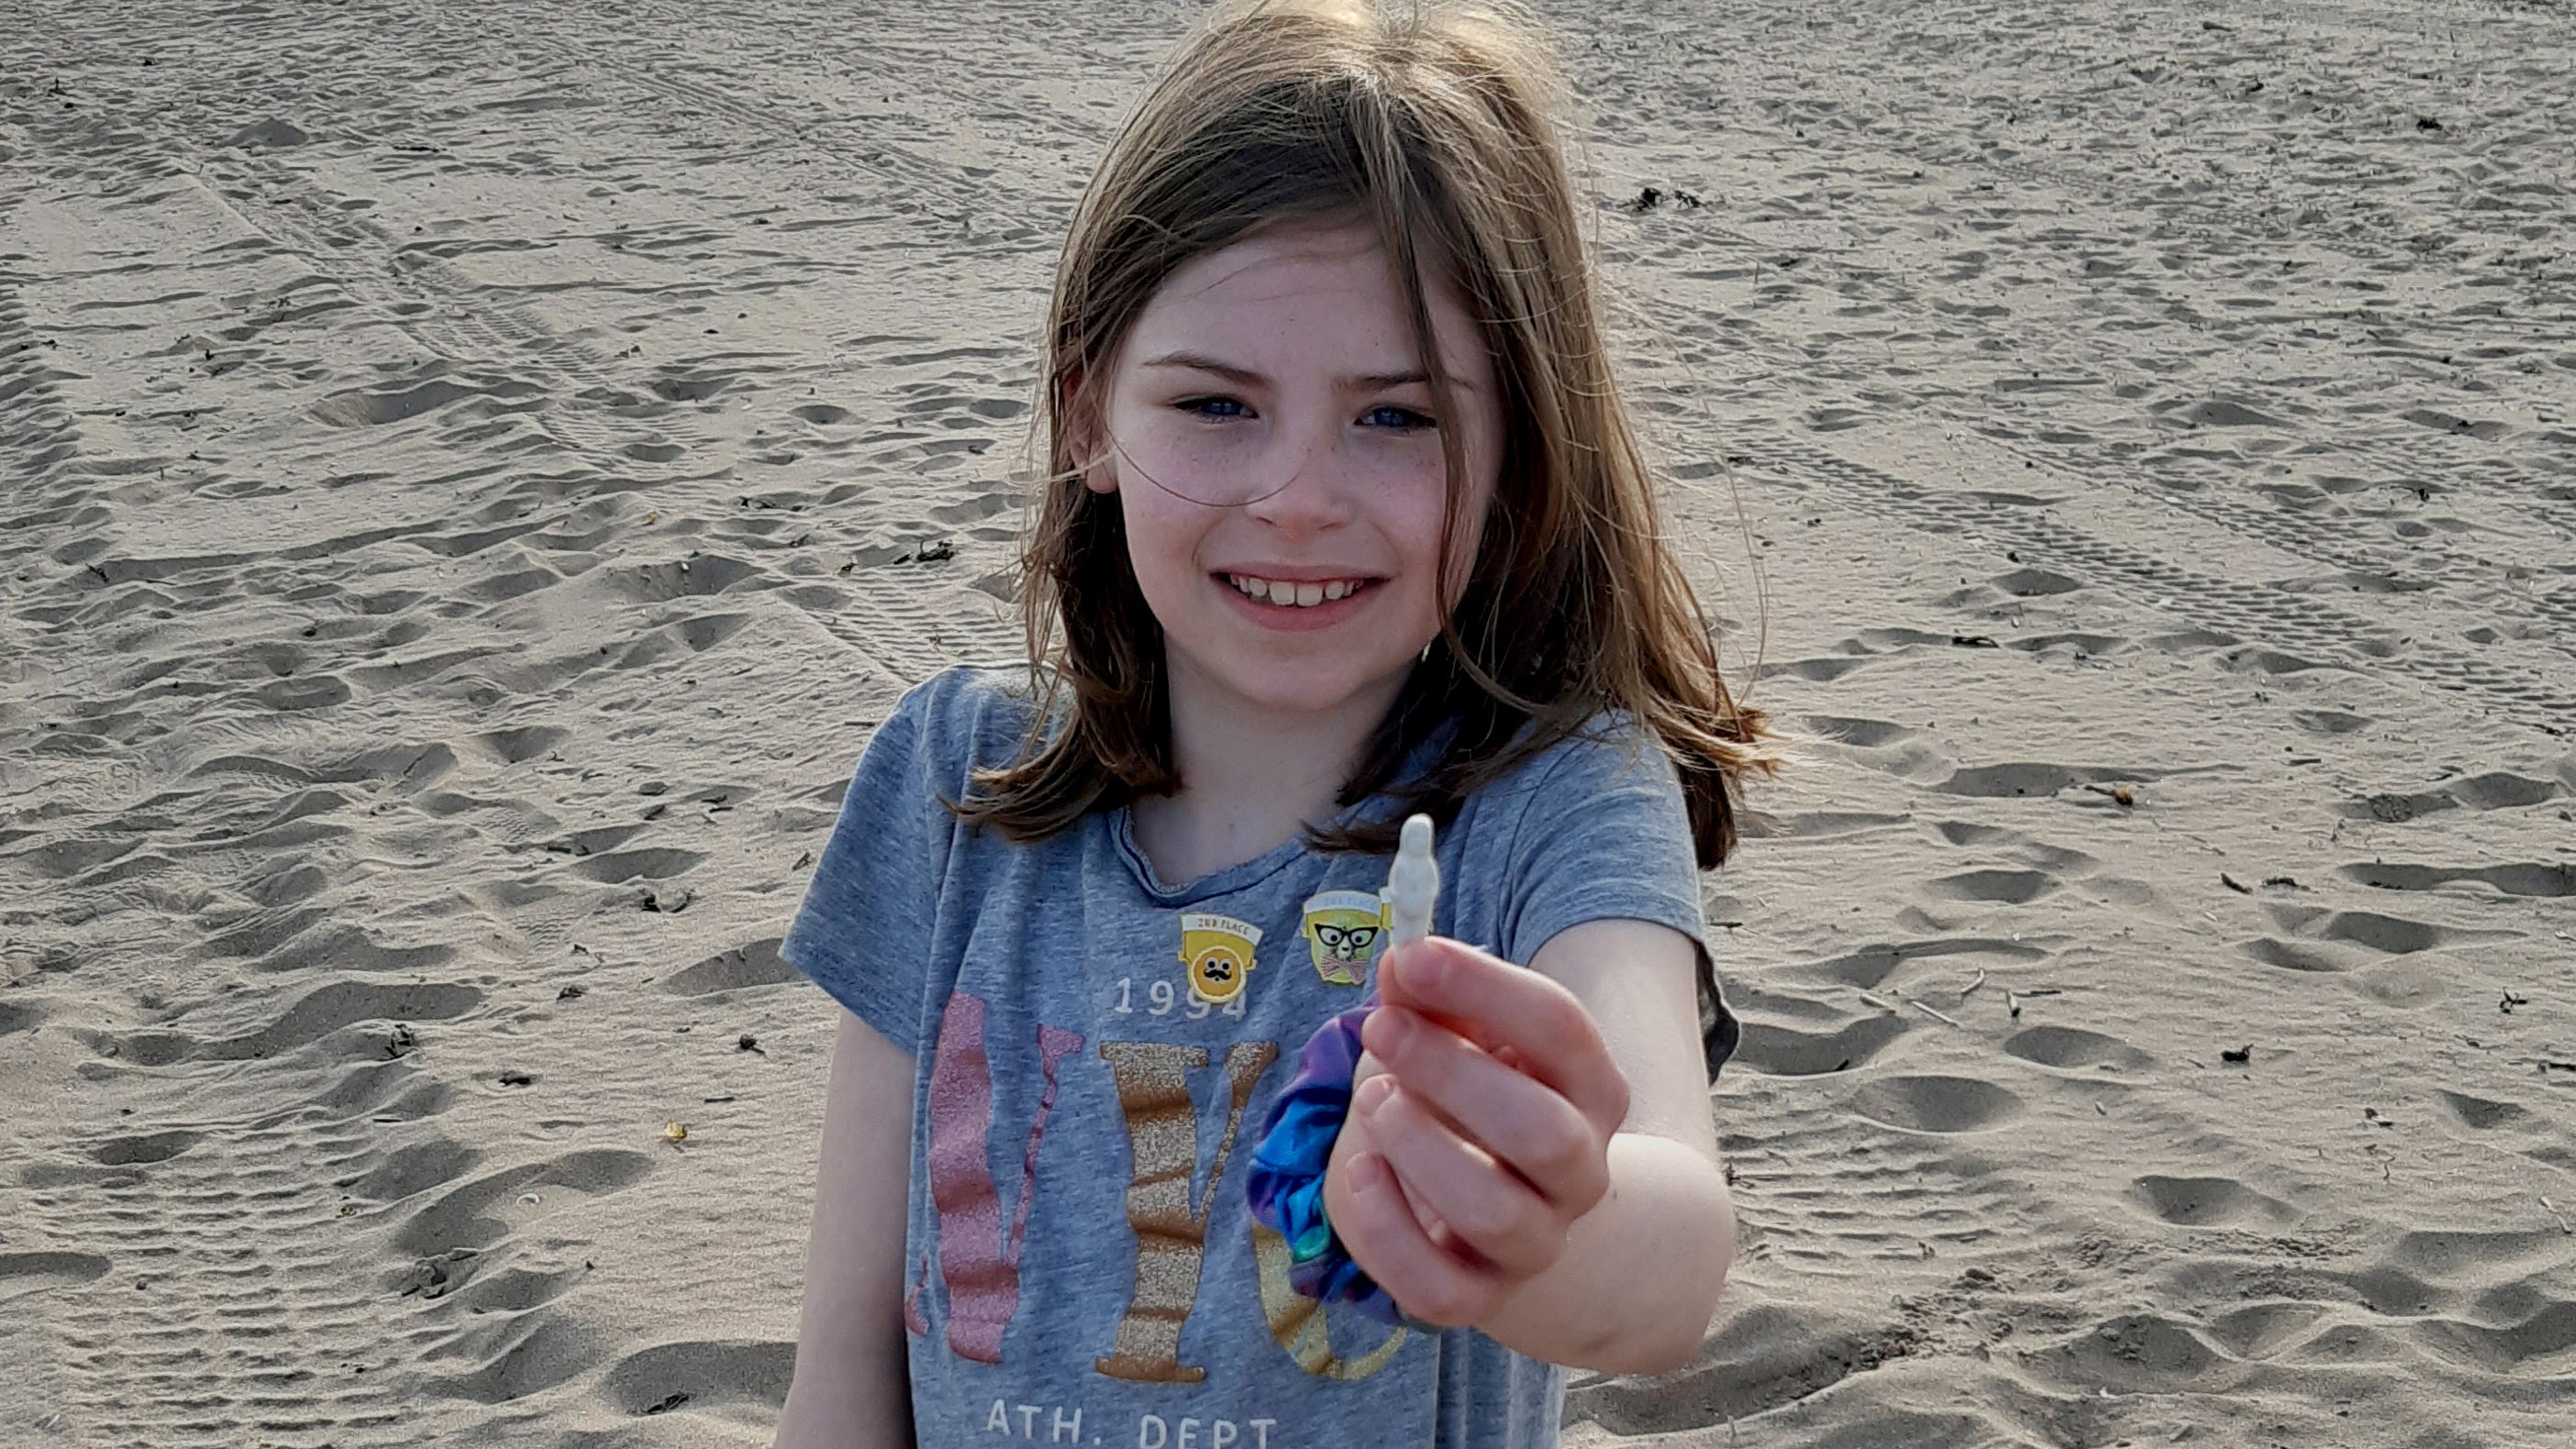 Woman finds rare, 19th century porcelain doll on Scottish beach